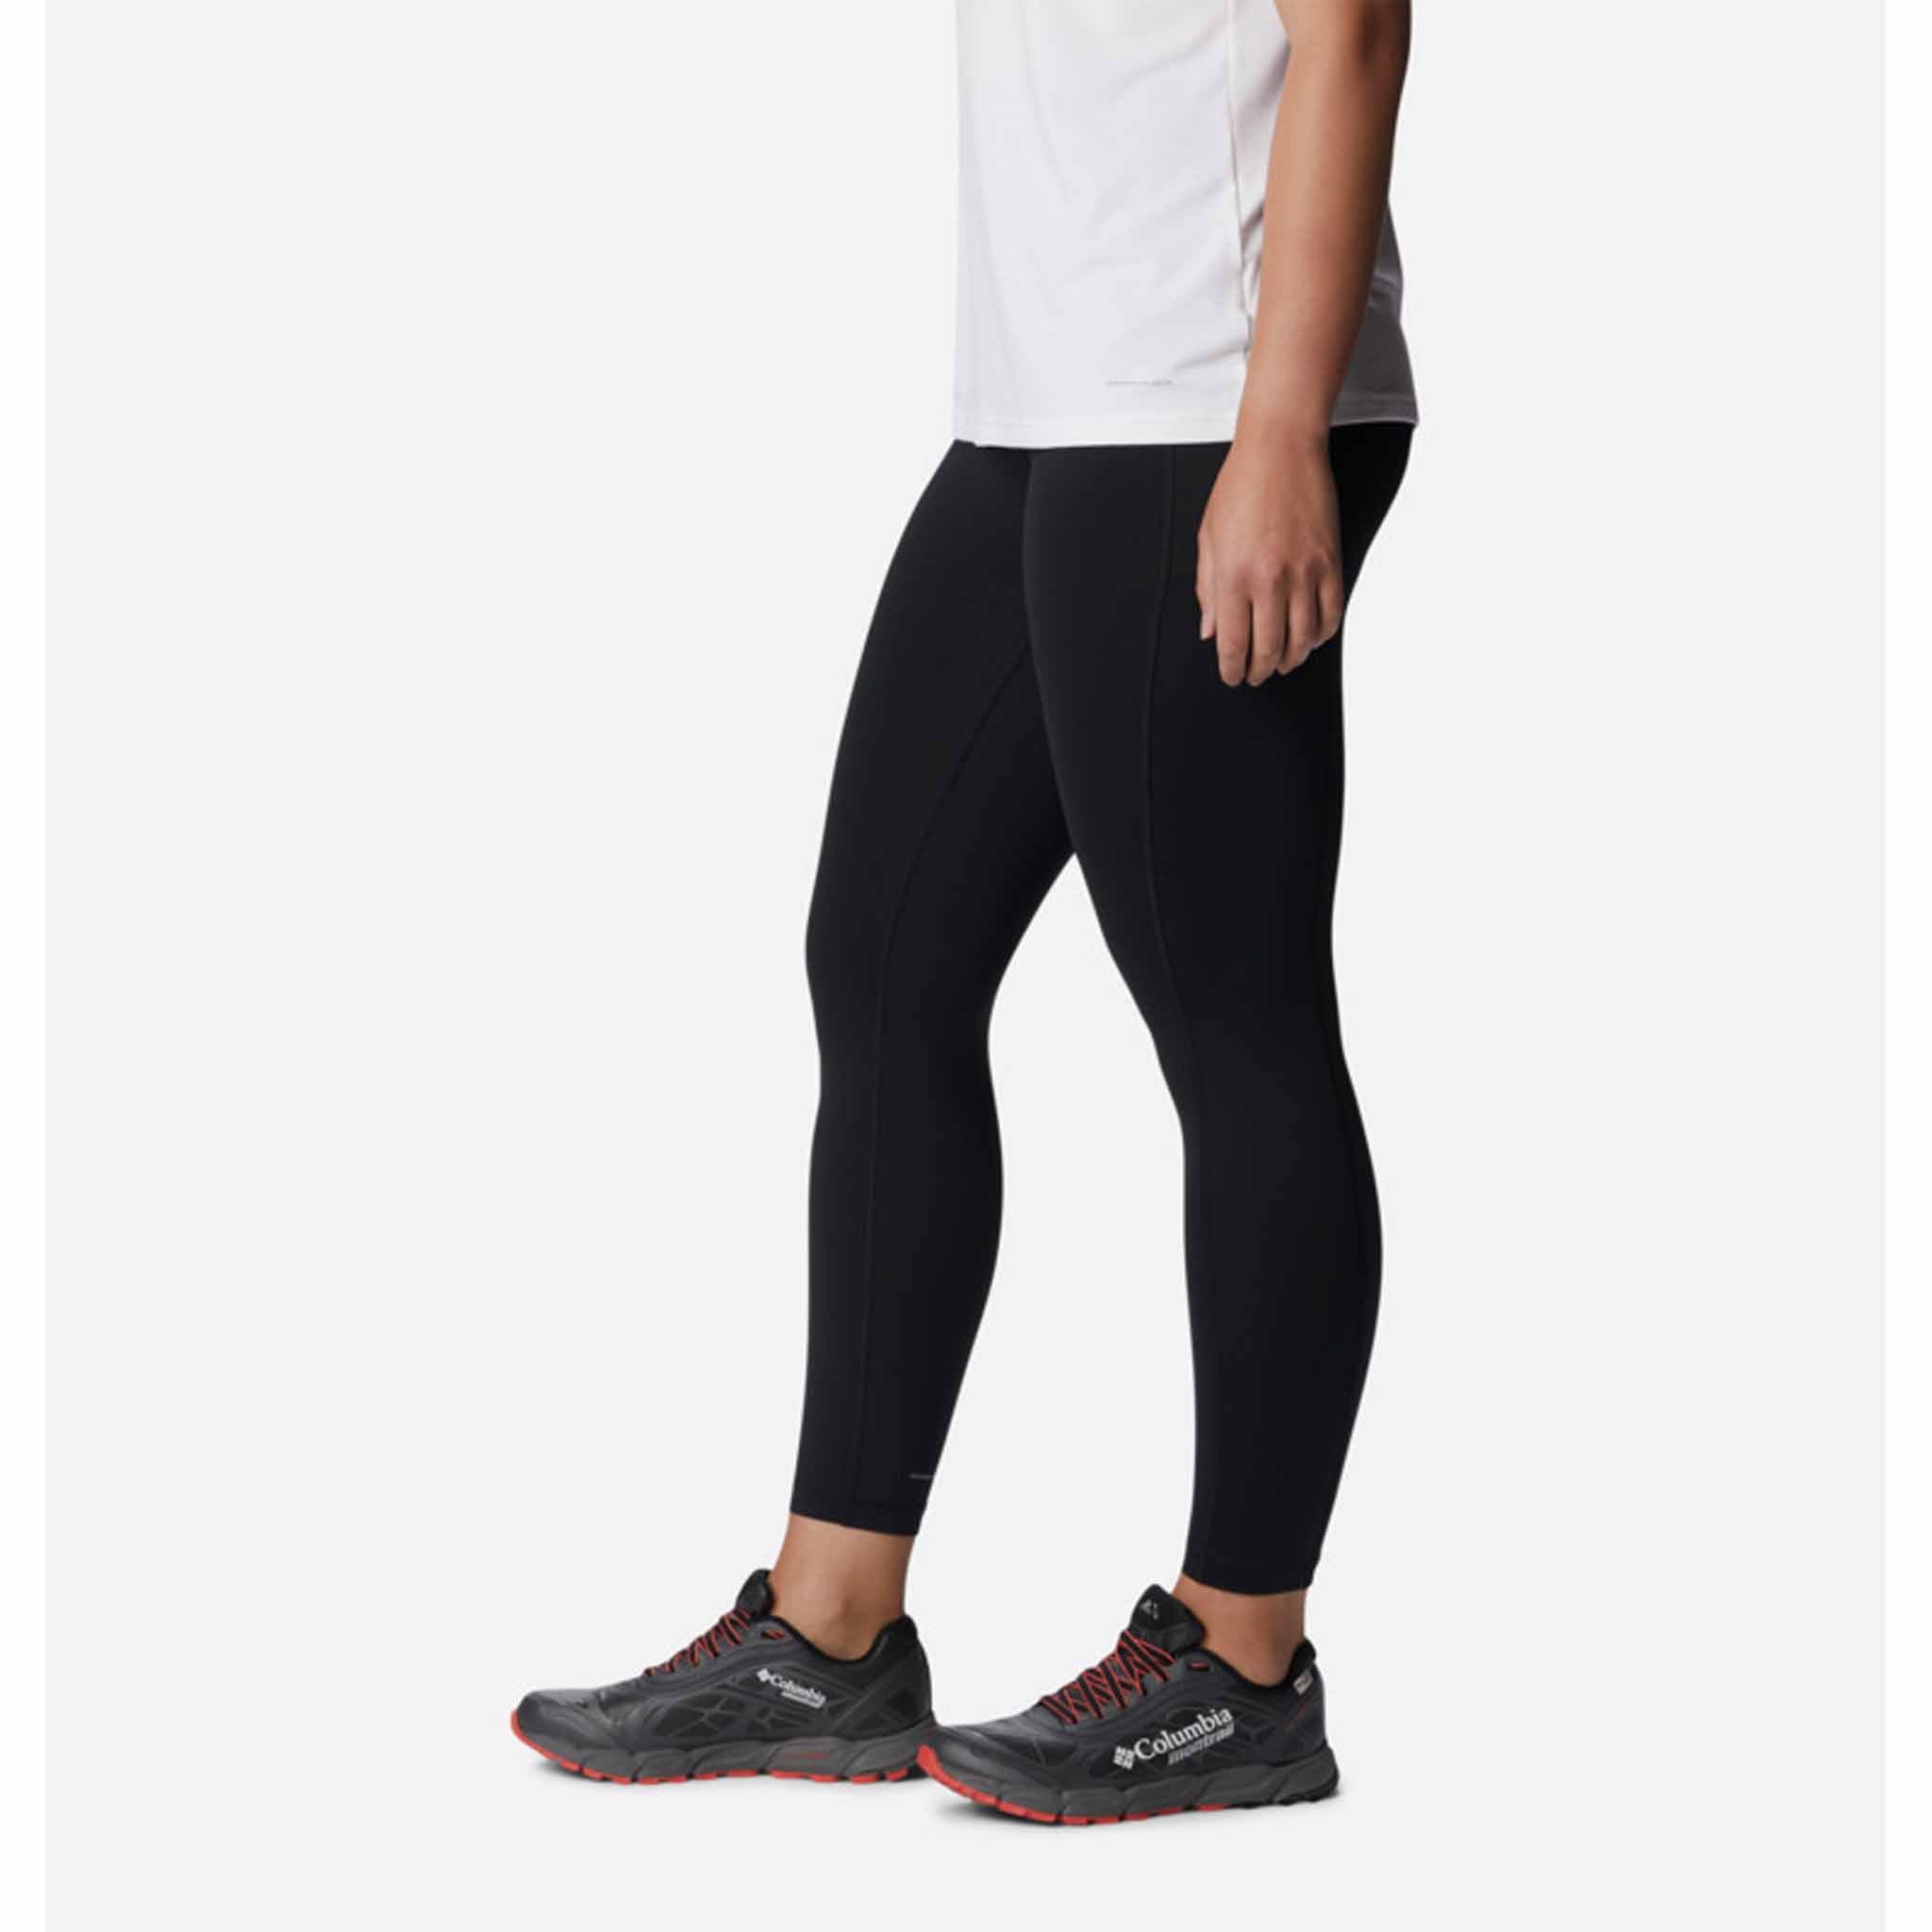 Columbia Endless Trail 7/8 running tights for women